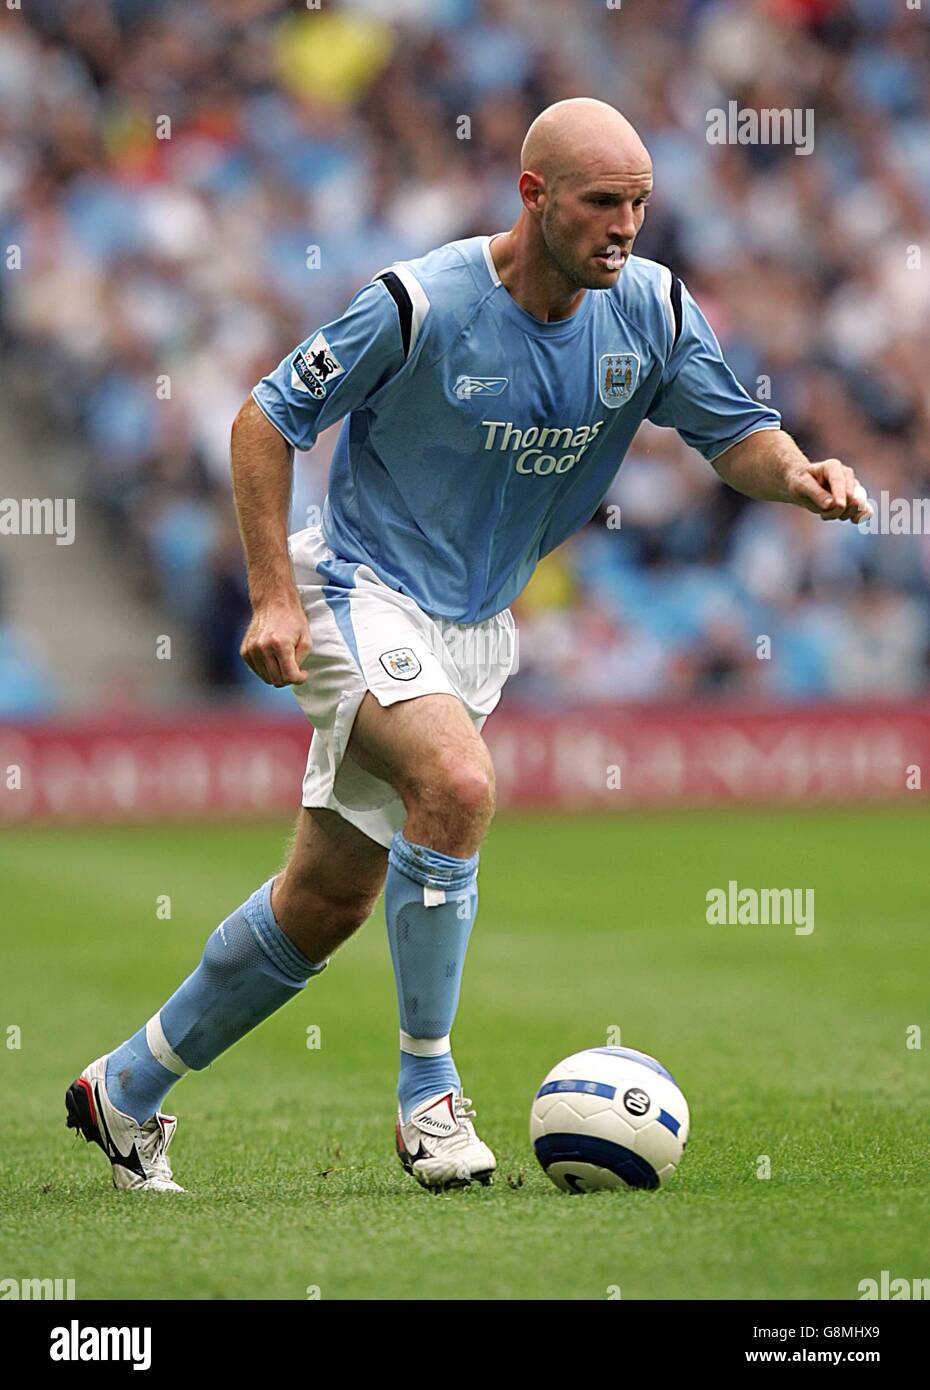 Soccer - FA Barclays Premiership - Manchester City v Portsmouth - City of Manchester Stadium. Danny Mills, Manchester City Stock Photo